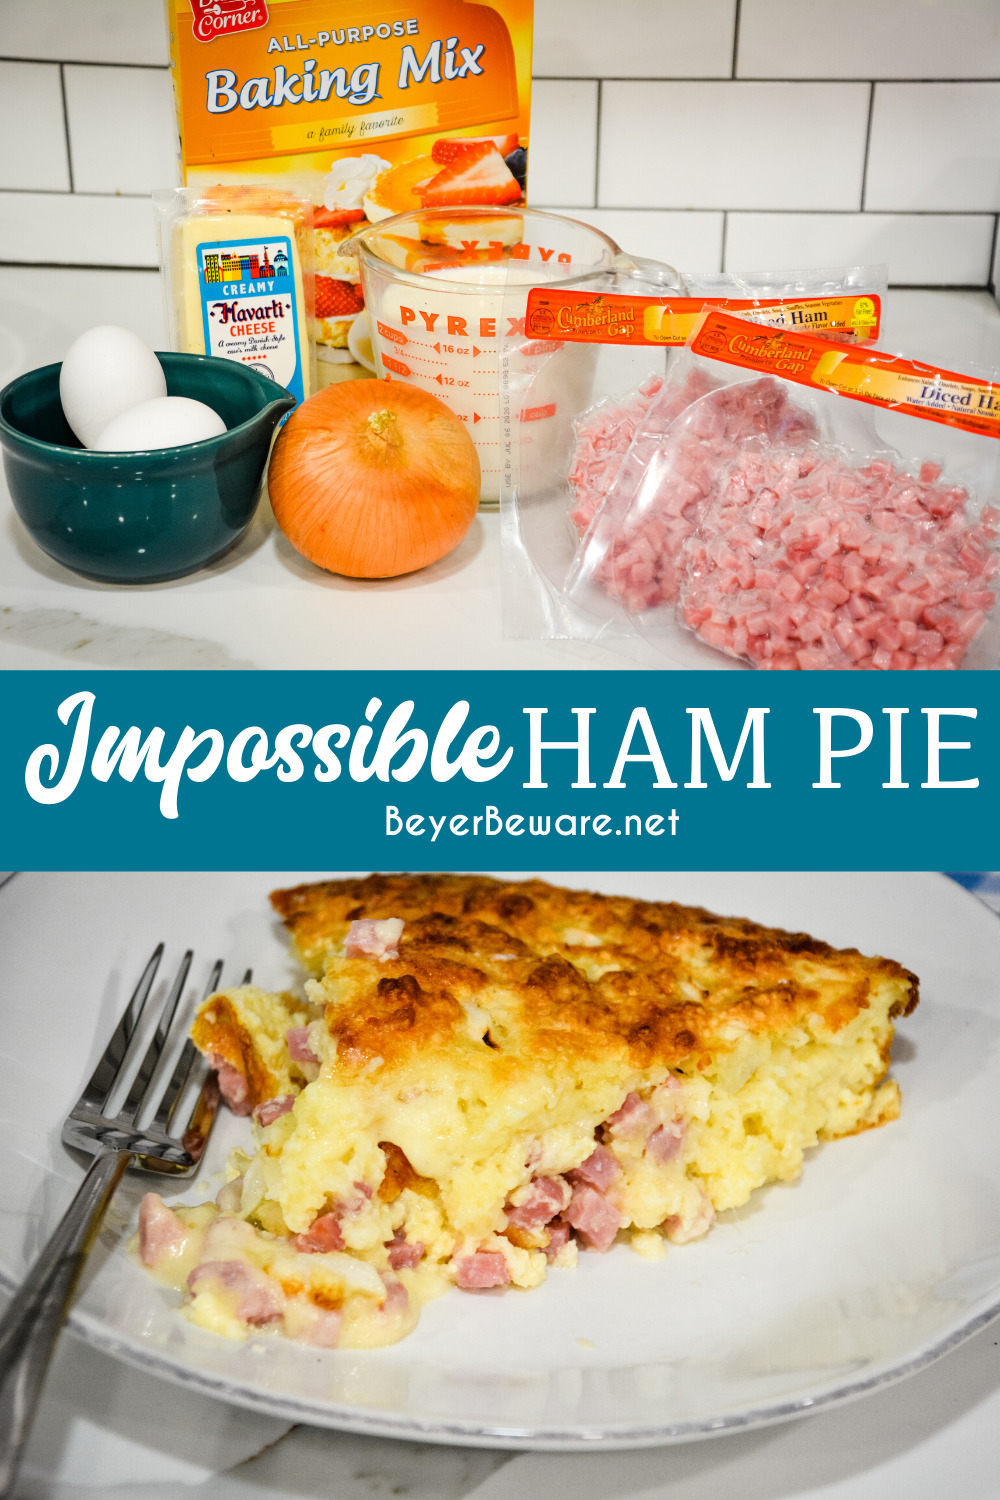 Impossible ham and swiss pie is a simple recipe to make with leftover ham and biscuit mix for an easy weeknight dinner.